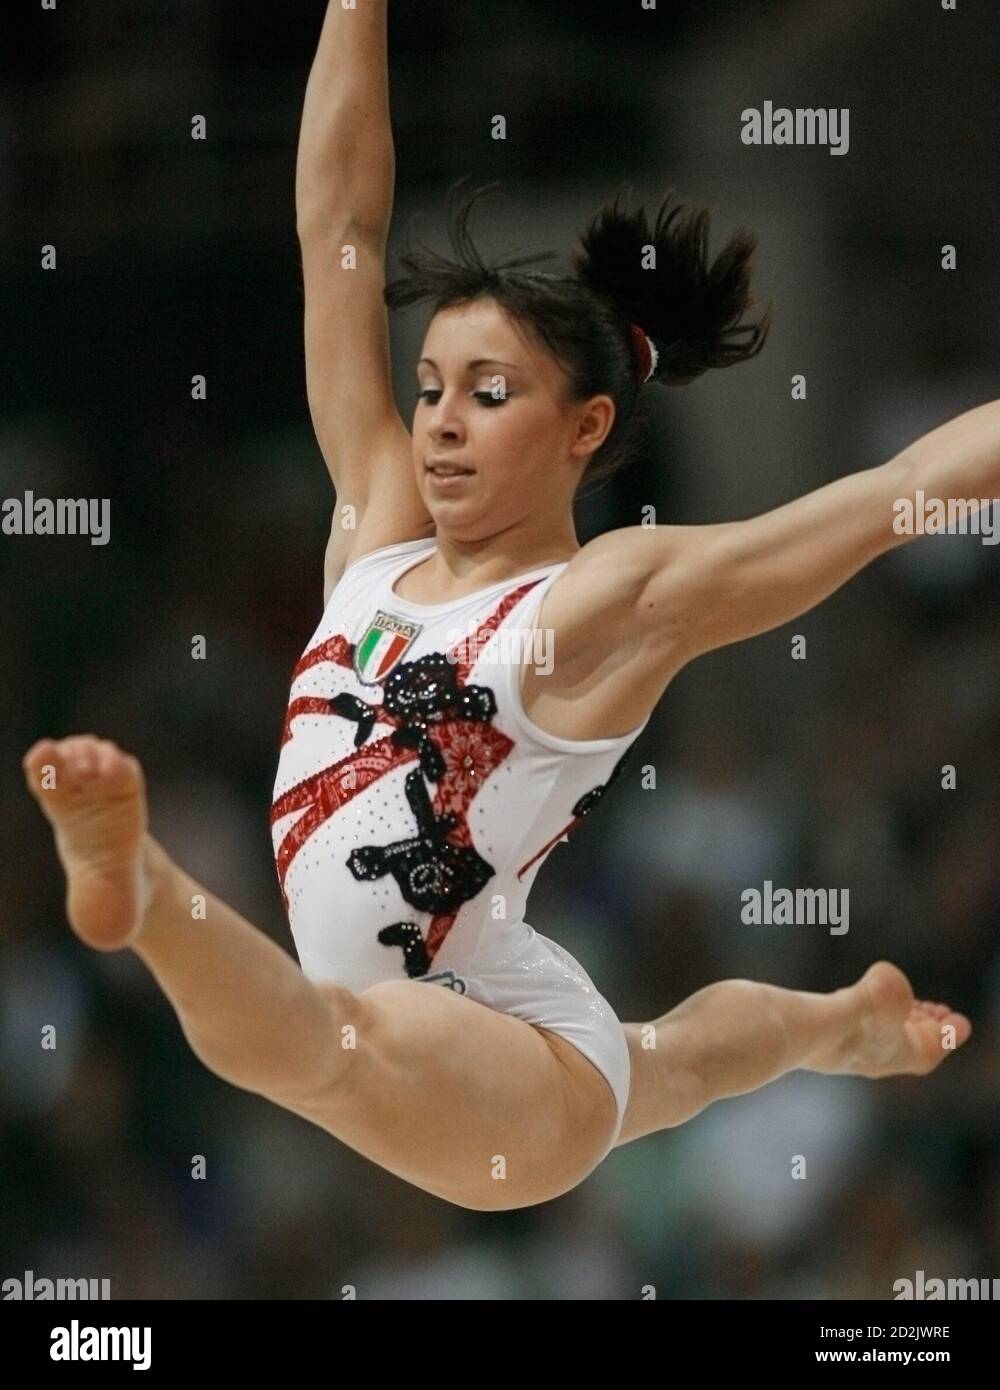 Italy S Vanessa Ferrari Competes On The Floor On Her Way To Win The Gold Medal Of The Women S Individual All Around Competition At The 39th Artistic Gymnastics World Championships In Aarhus Denmark October